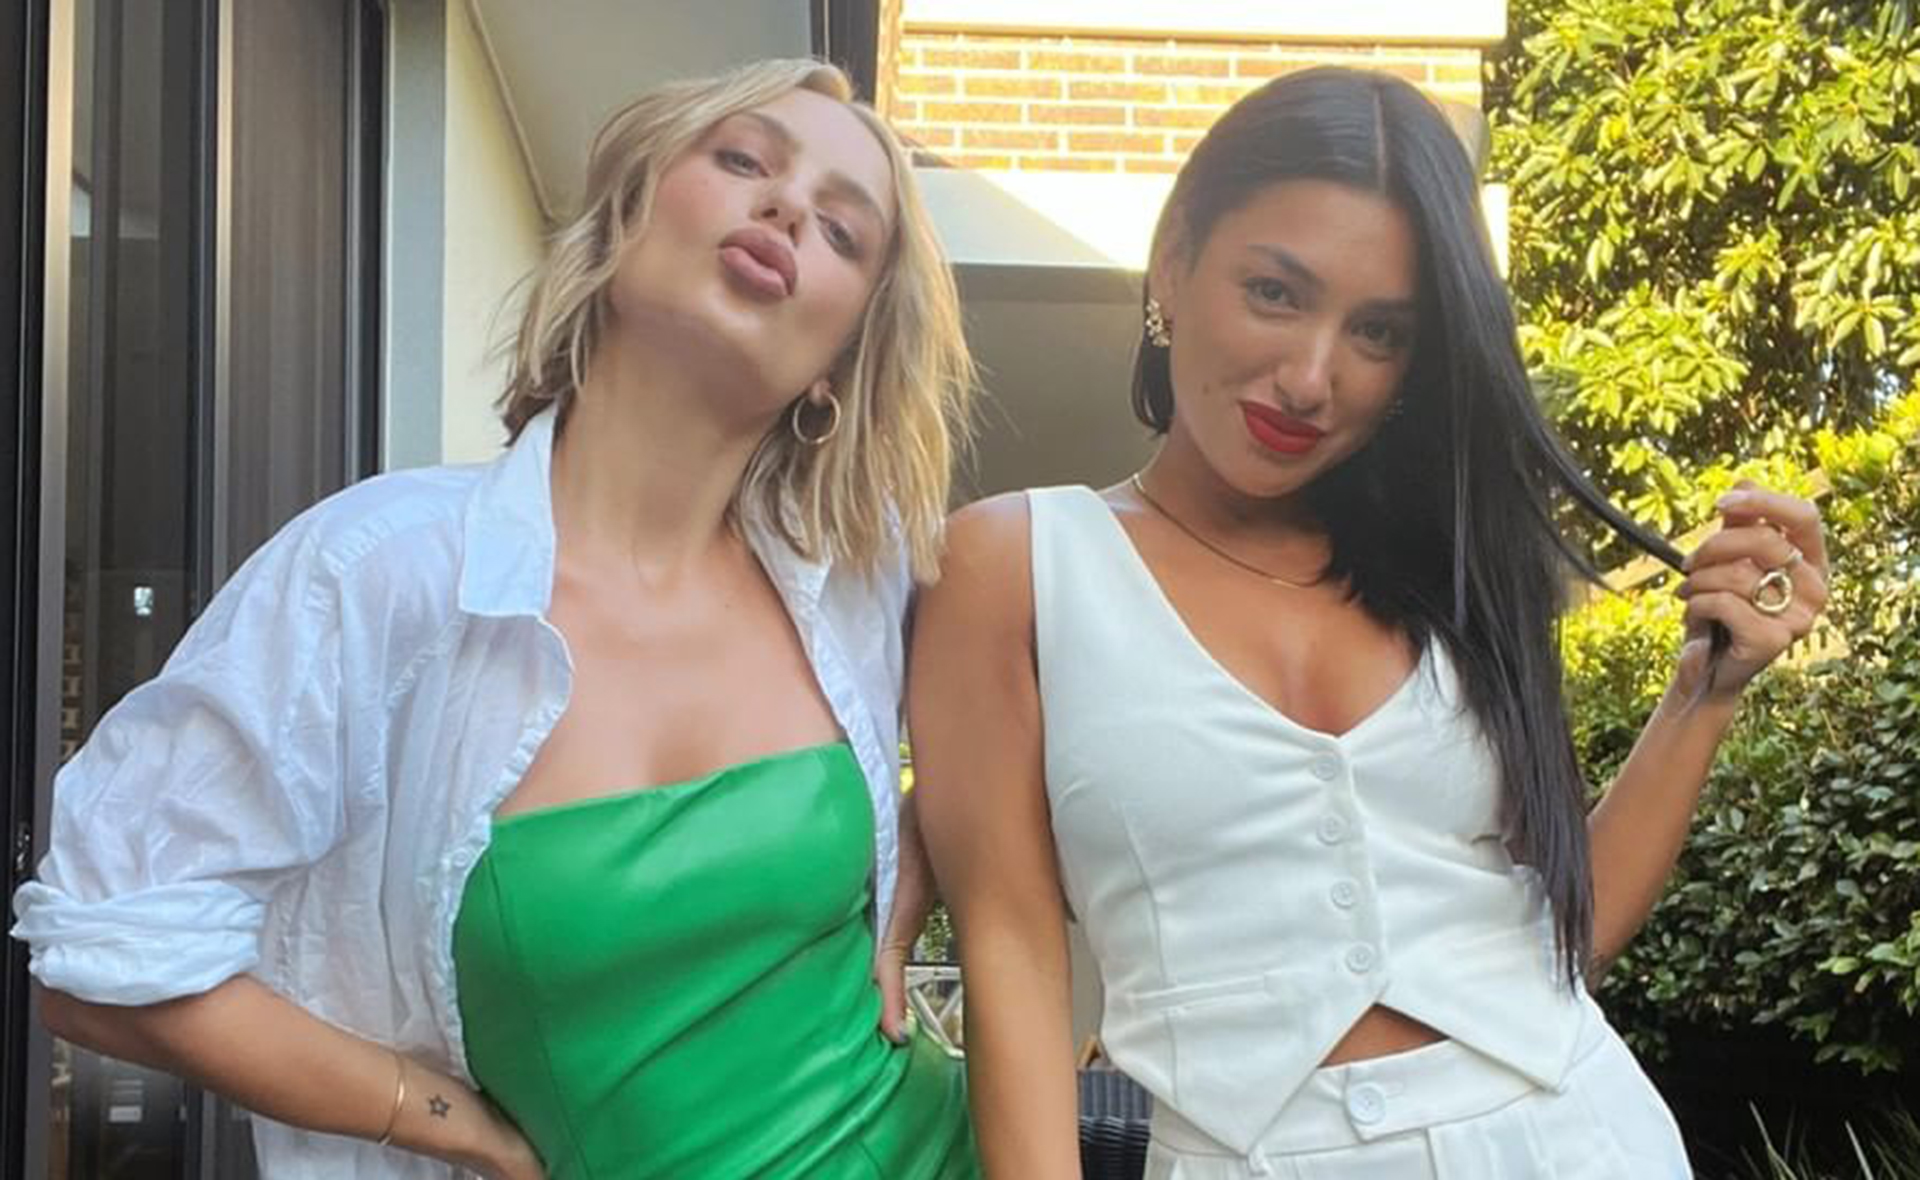 EXCLUSIVE: MAFS’ Domenica Calarco and Ella Ding reveal which TV shows they have their sights set on